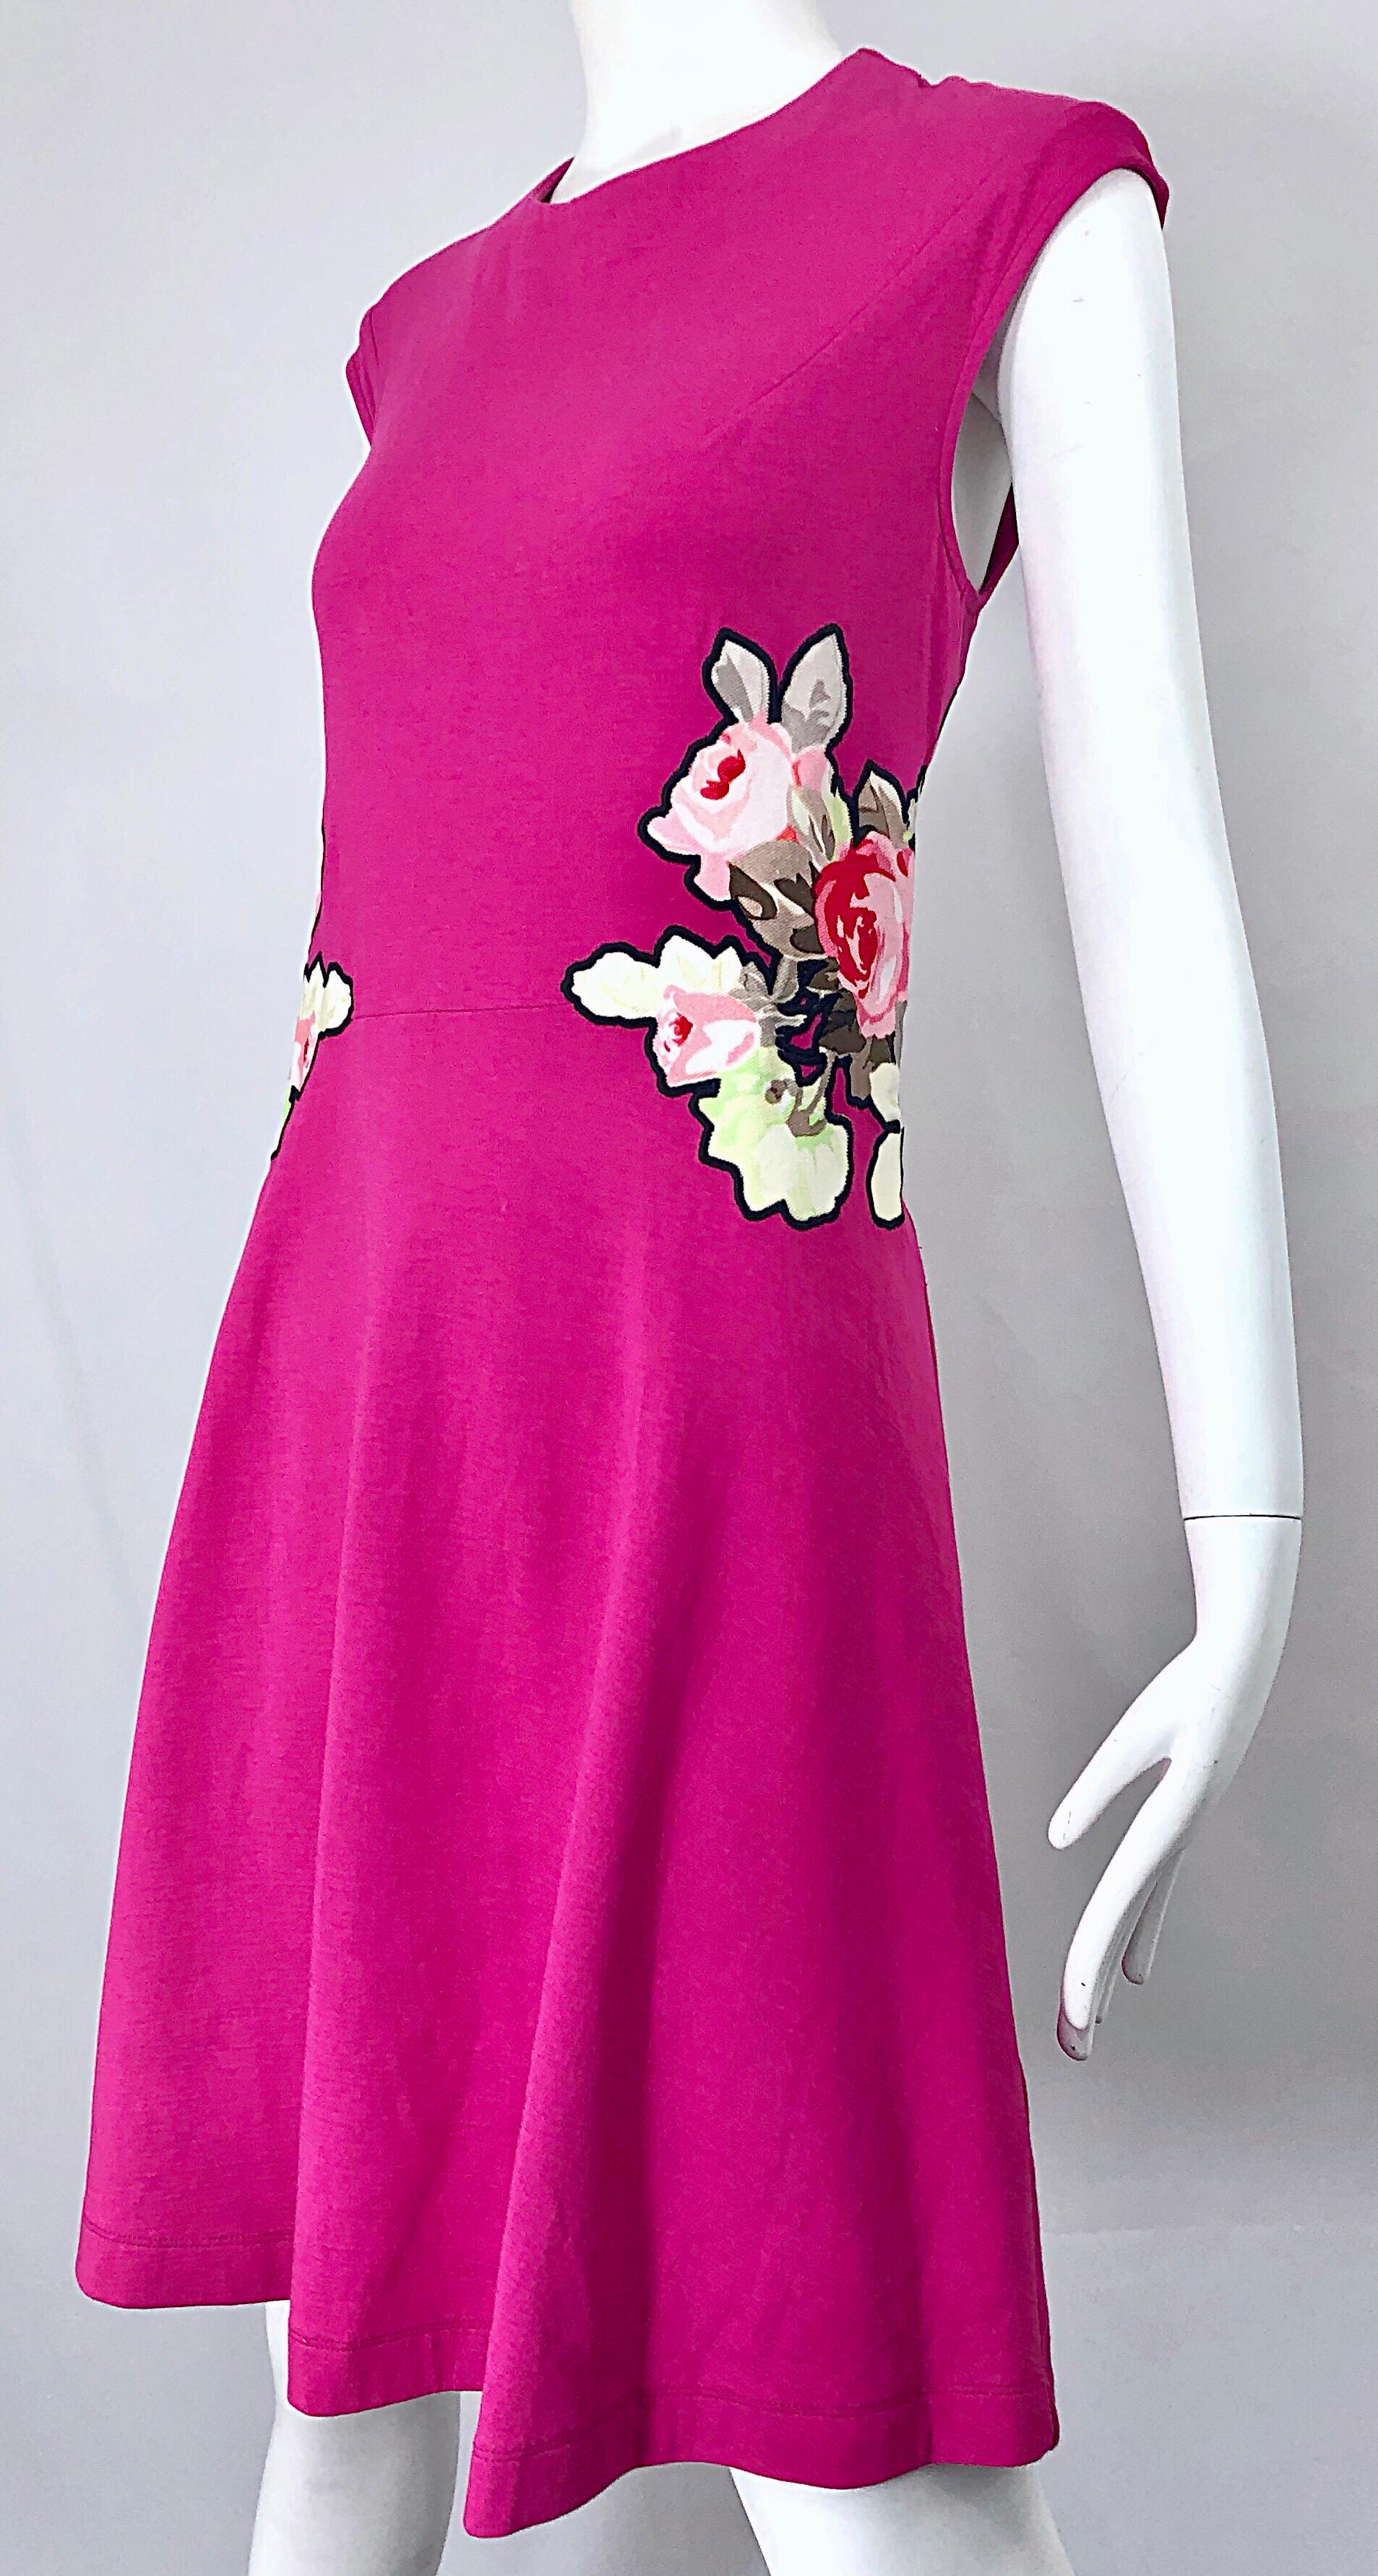 Carven Hot Pink Bouquet of Roses Sleeveless Cotton A - Line Dress Size Medium In Excellent Condition For Sale In San Diego, CA